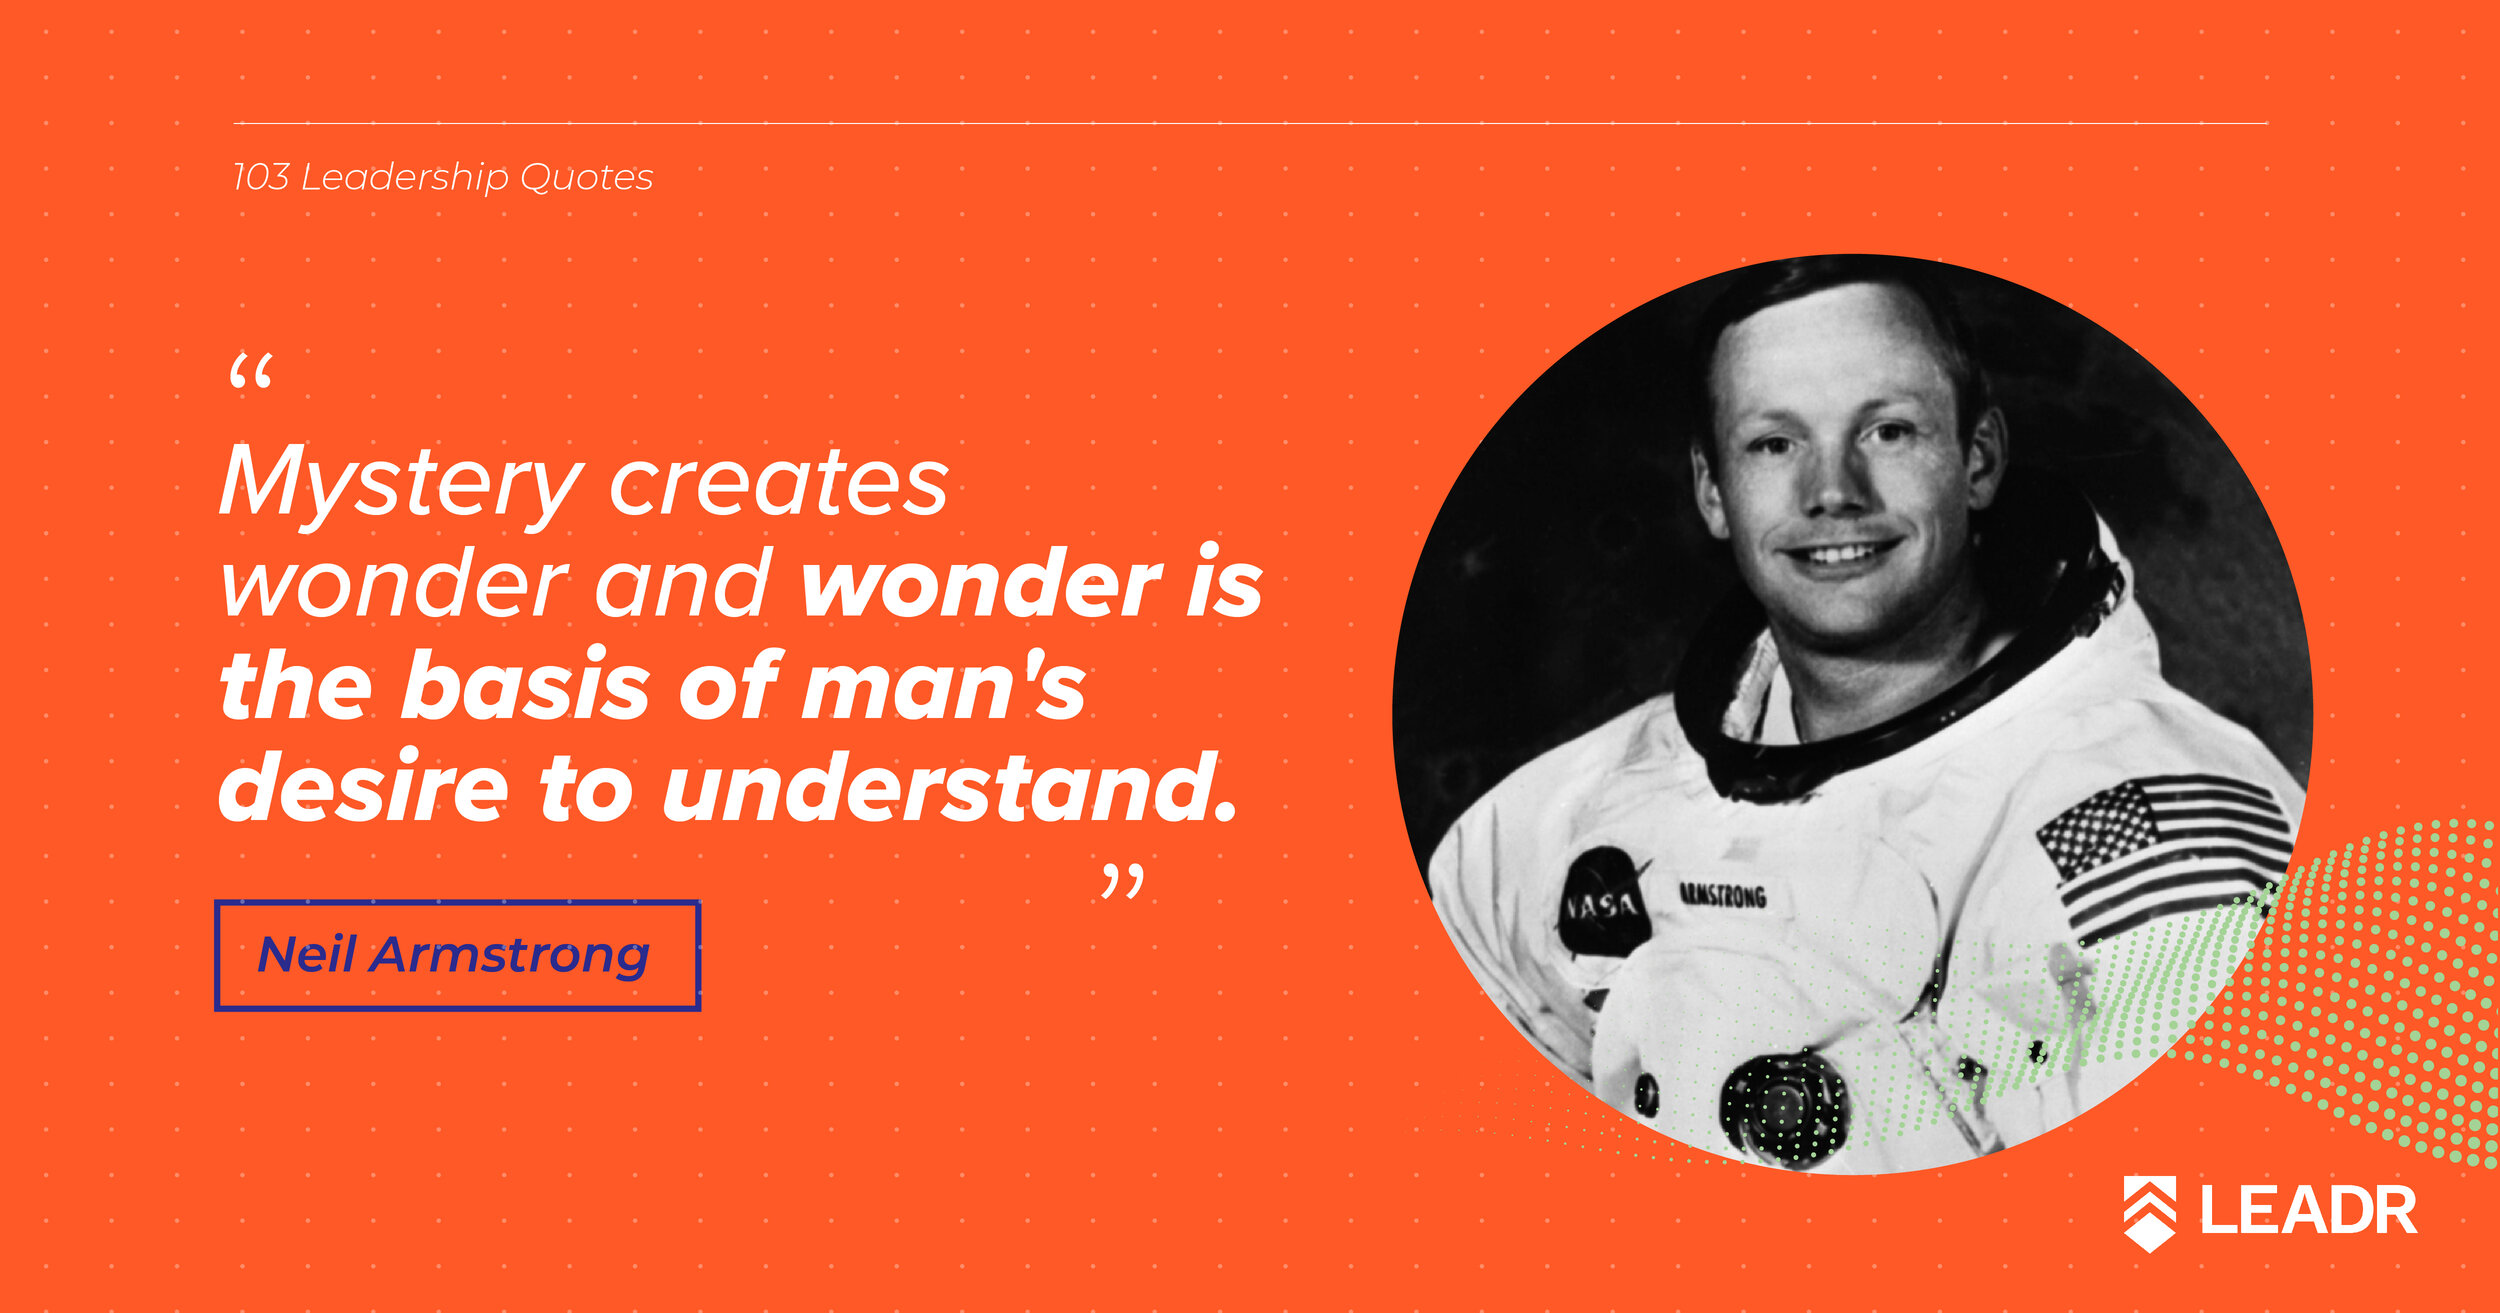 Royalty free downloadable leadership quotes - Neil Armstrong